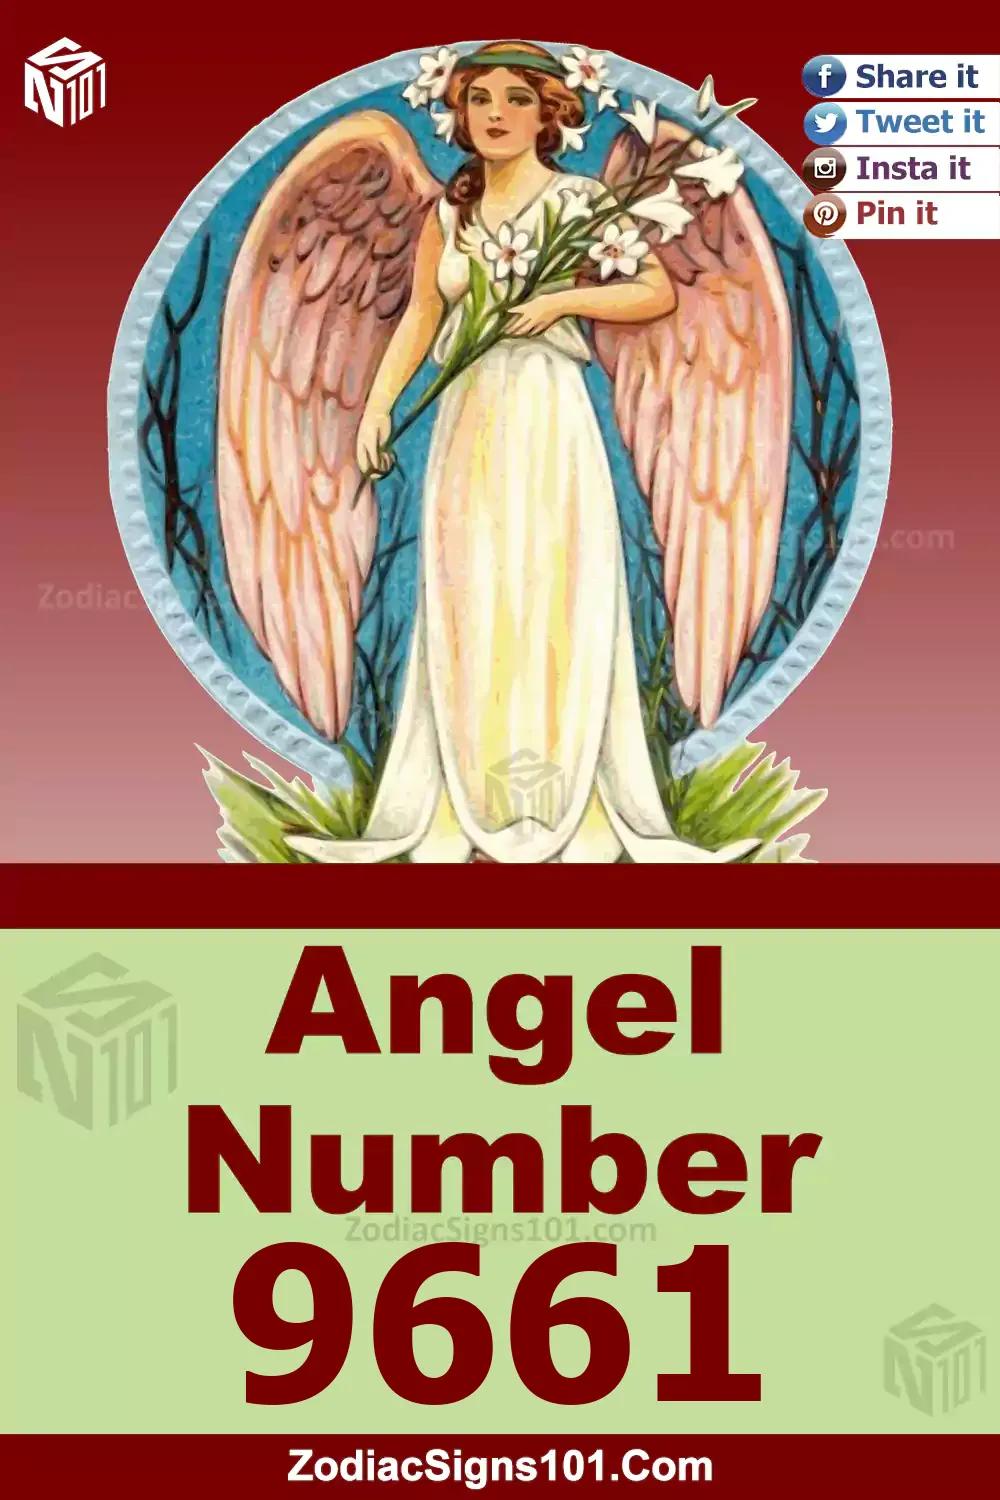 9661 Angel Number Meaning